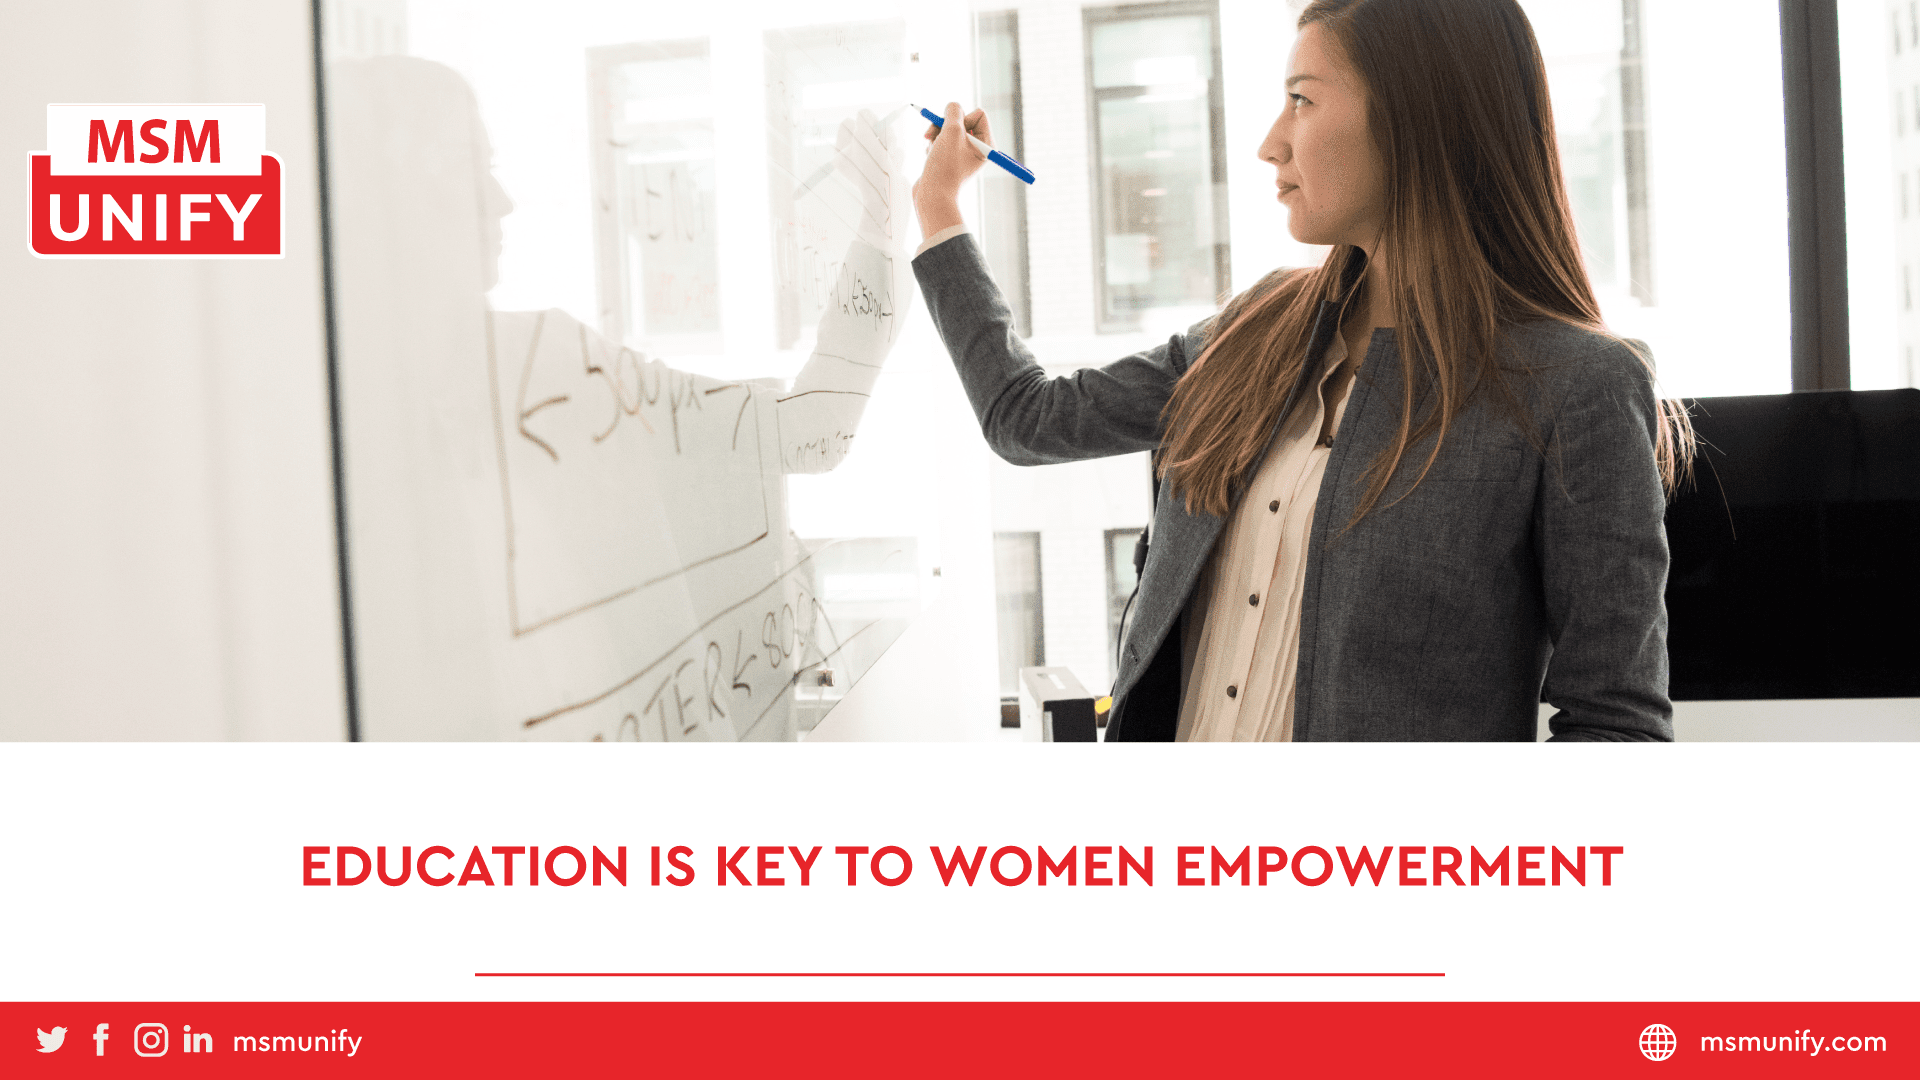 MSM Unify Education is Key to Women Empowerment